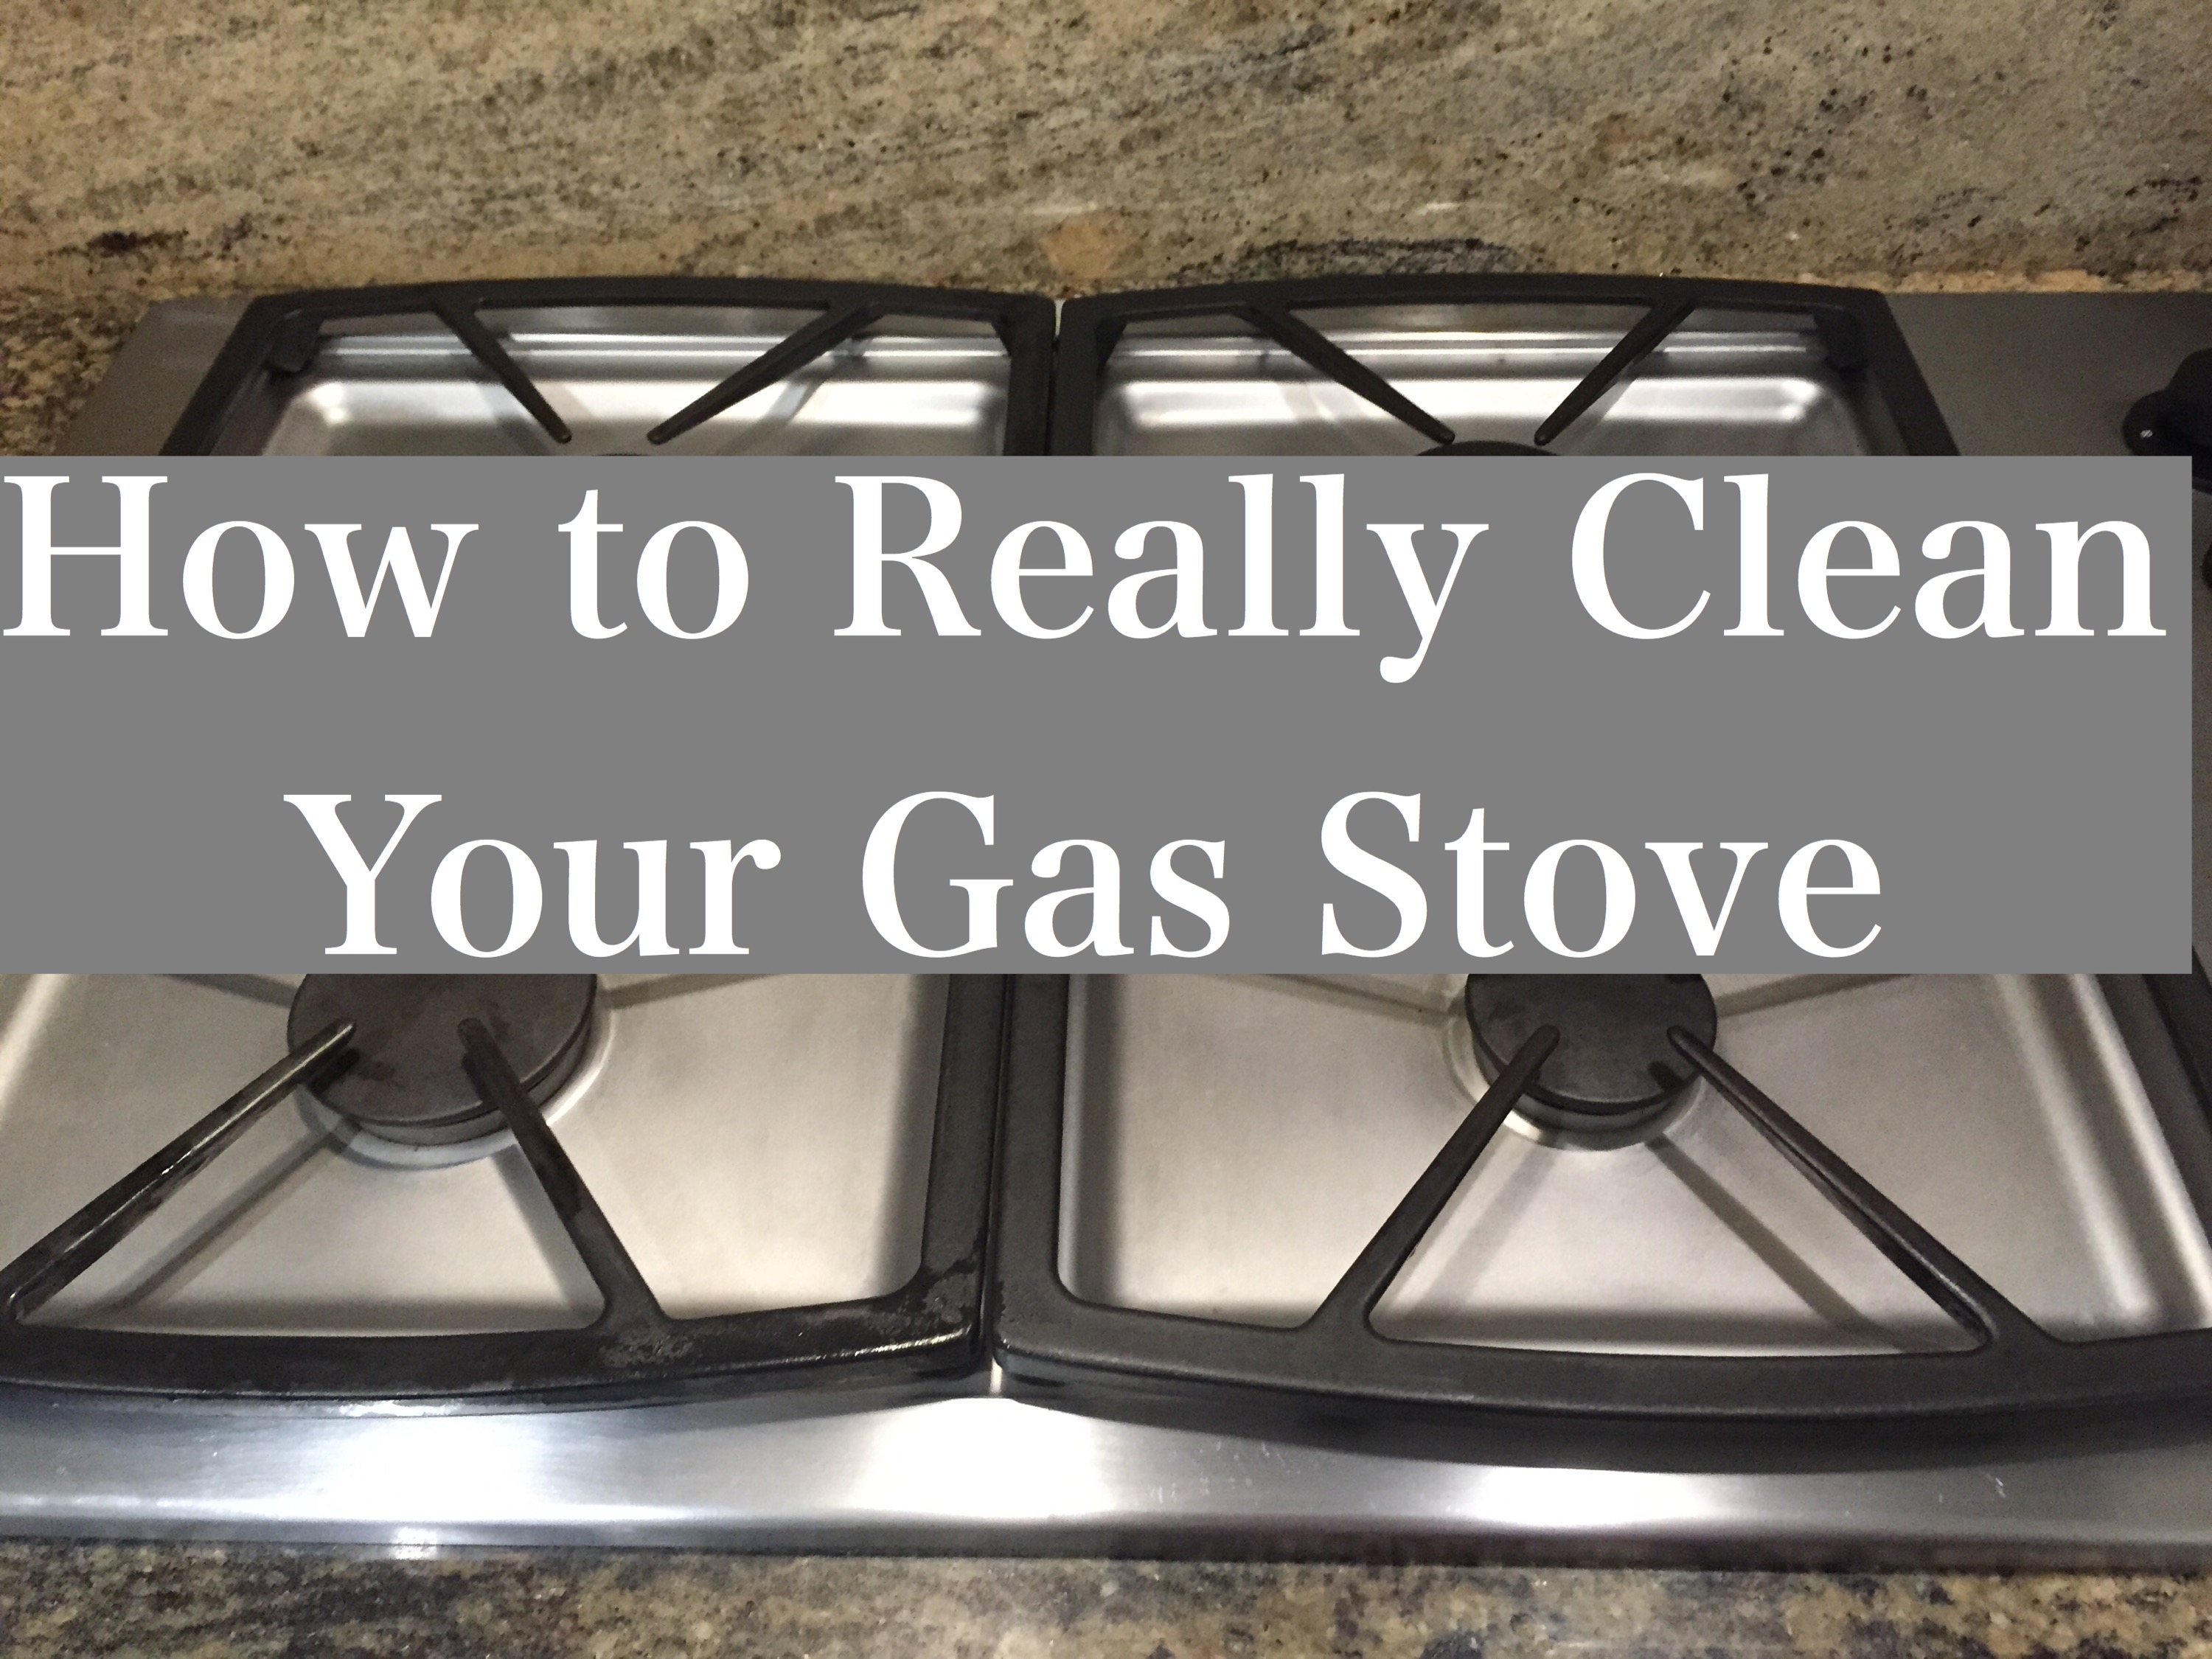 Cleaning: How to Clean a Gas Stove by Happy Family Blog